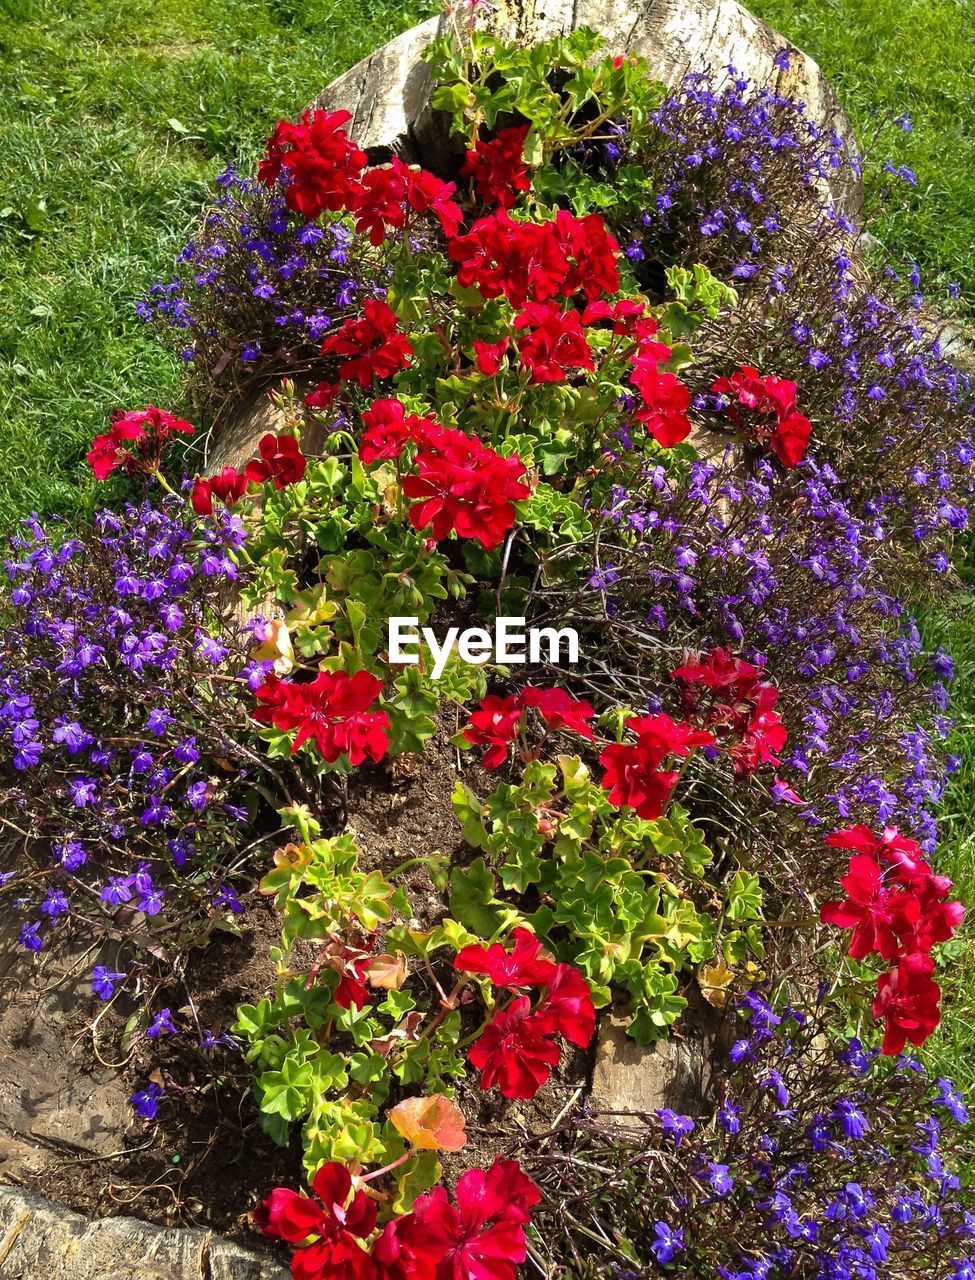 Lots of colors in small flowers. Le Fayet. France. Flower Growth Nature Summer Beauty In Nature Plant Freshness Fragility Red No People Day Outdoors Flower Head Popular Photos Exceptional Photographs EyeEm Gallery The Week On EyeEm IPhoneography Mix Yourself A Good Time